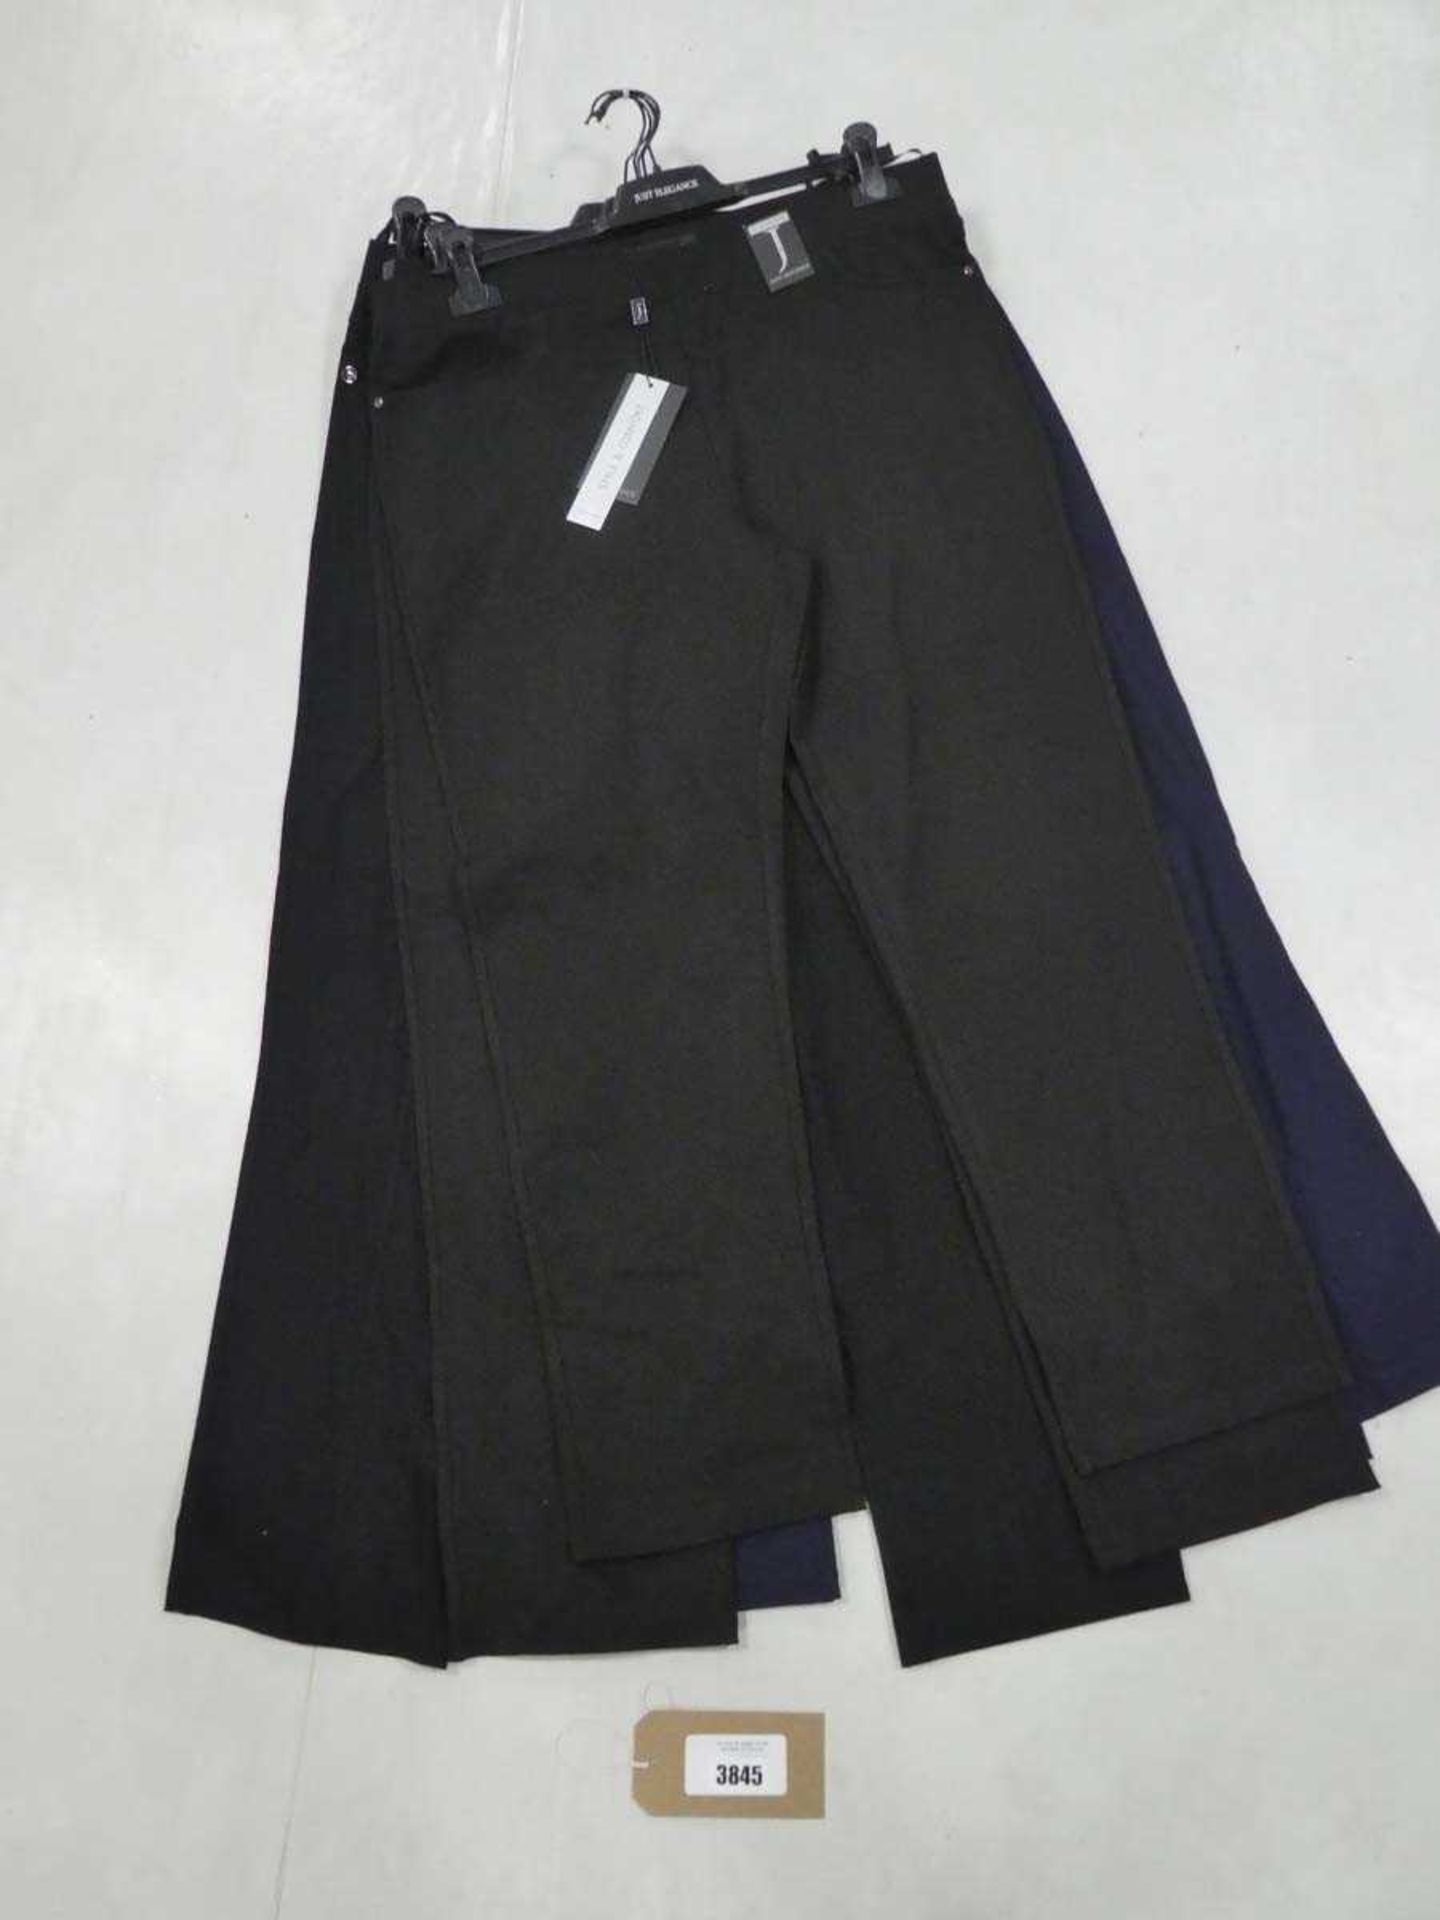 +VAT 5 Just Elegance ladies jegging trousers in black and navy various sizes (hanging)